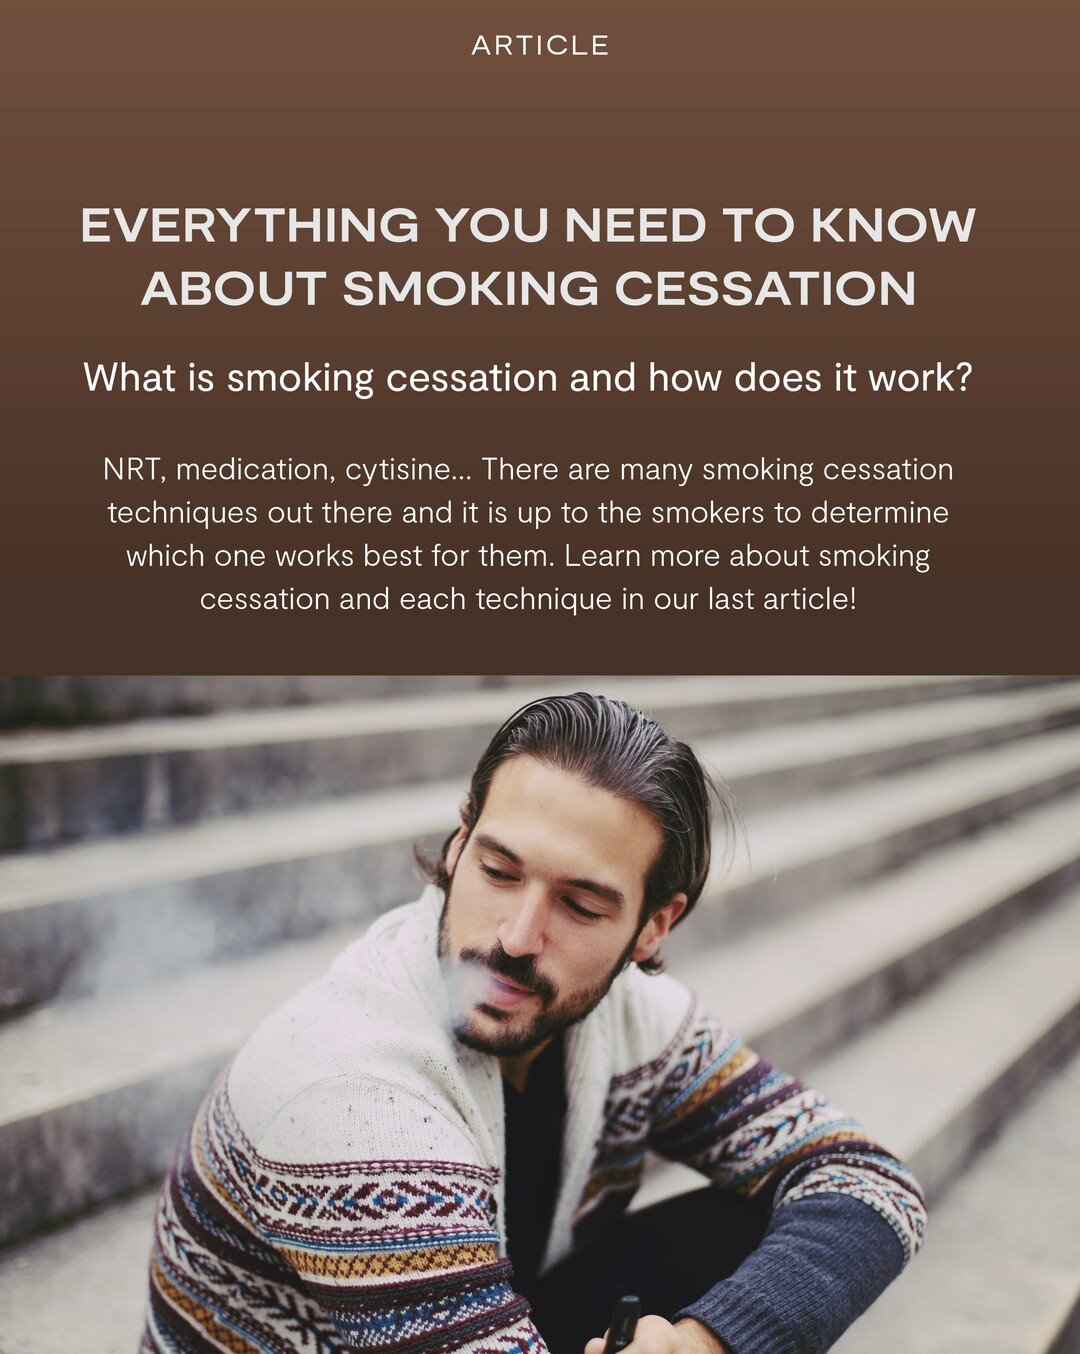 Smoking cessation is the process of quitting smoking. It is an effective way to reduce your exposure to harmful cigarette smoke and improve your health. Effective cessation is the key to increasing your chances of living a longer, healthier life 🫁🌱